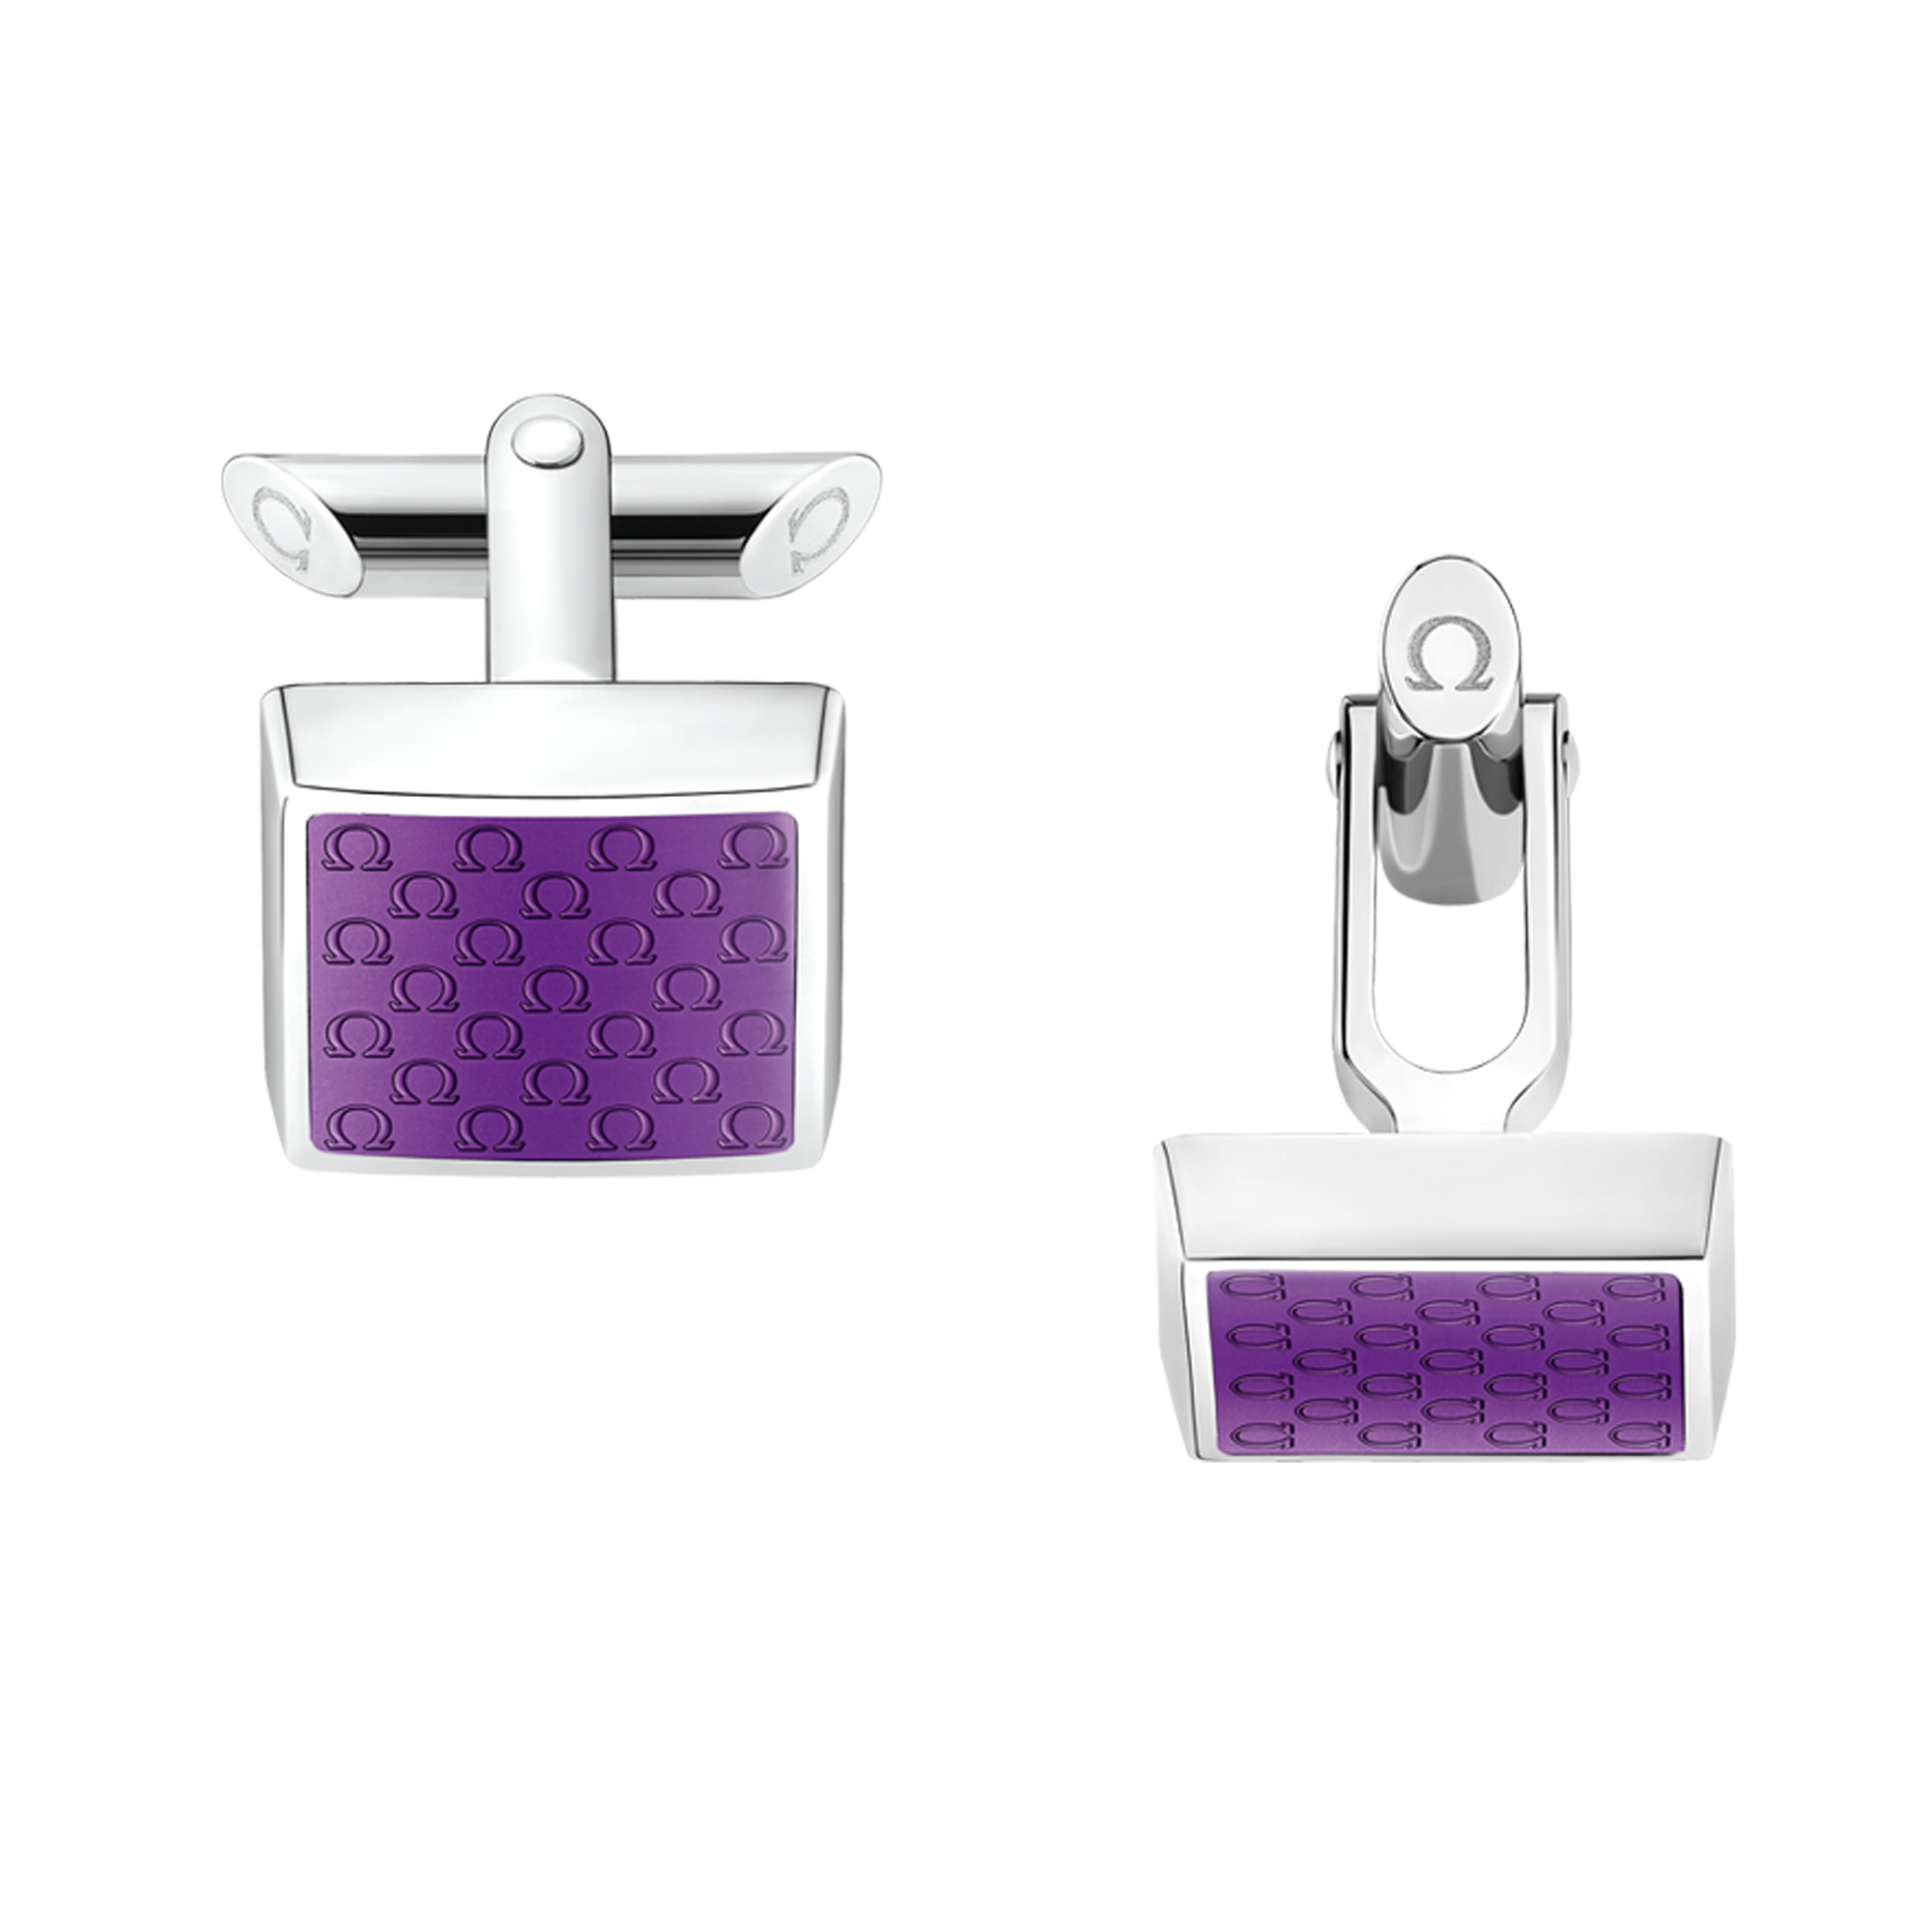 Omegamania Cufflinks, Stainless steel, Violet resin - CA02ST0000305